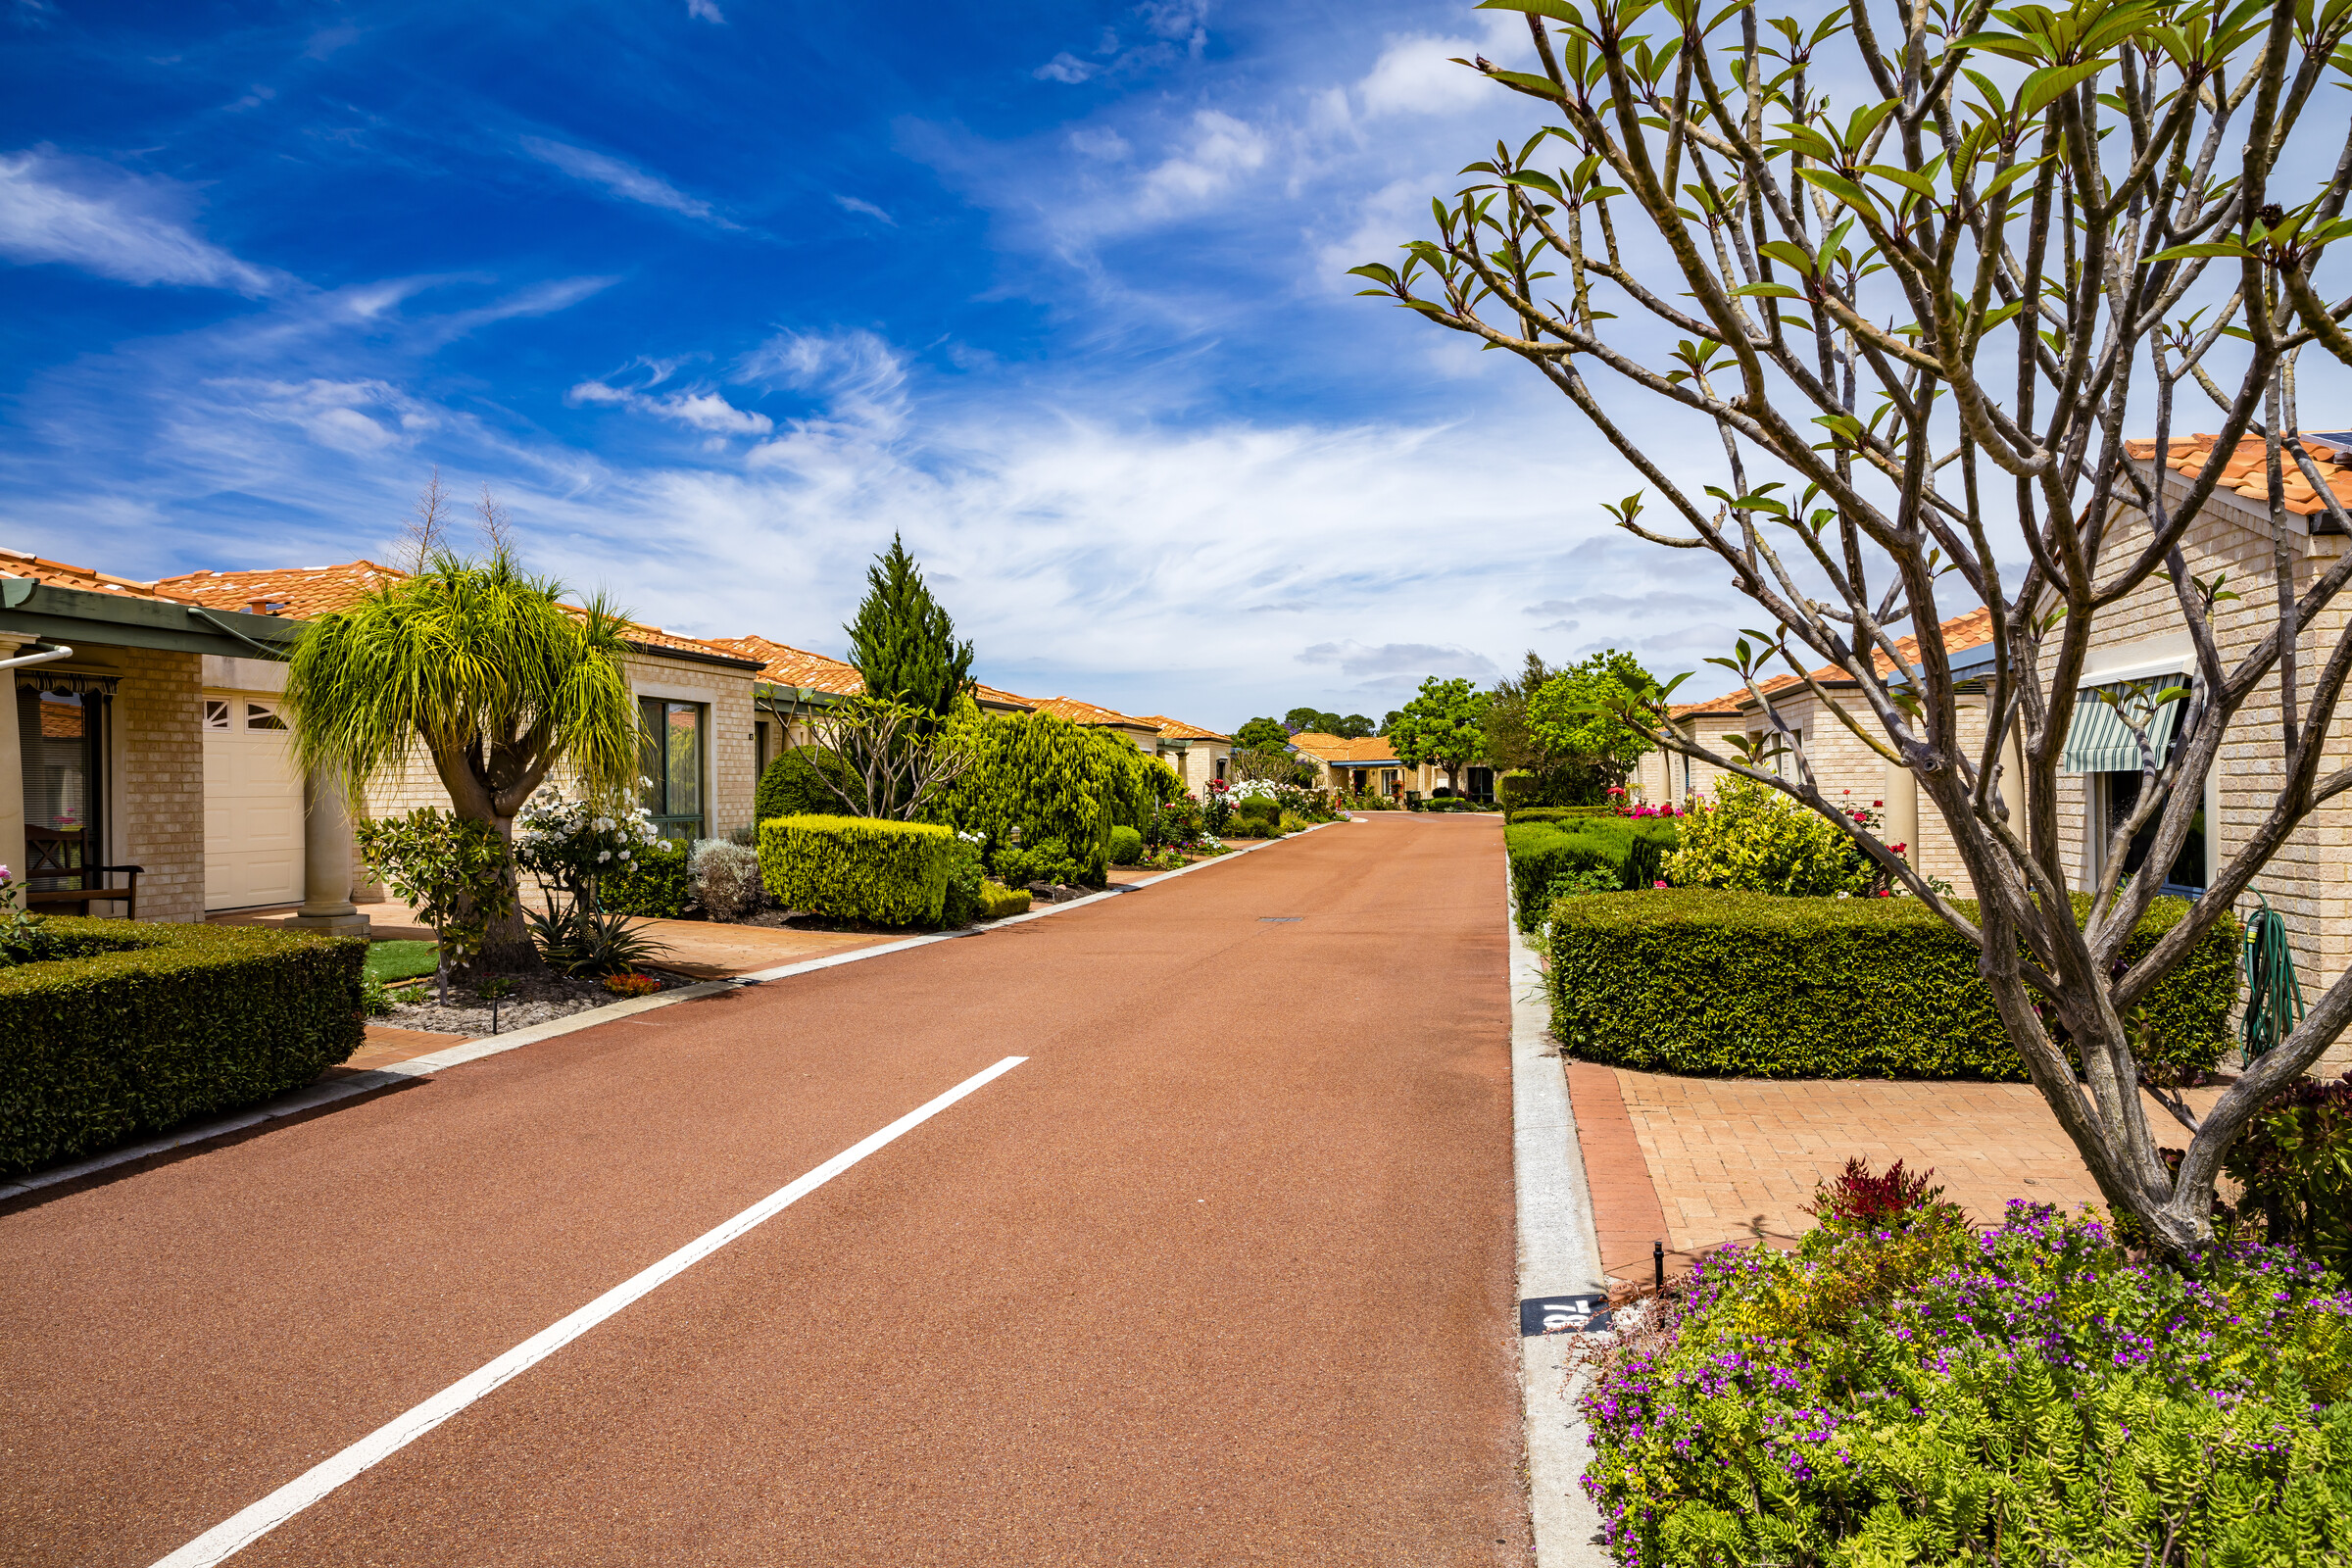 PINV - The Pines - Village Photography Streetscape